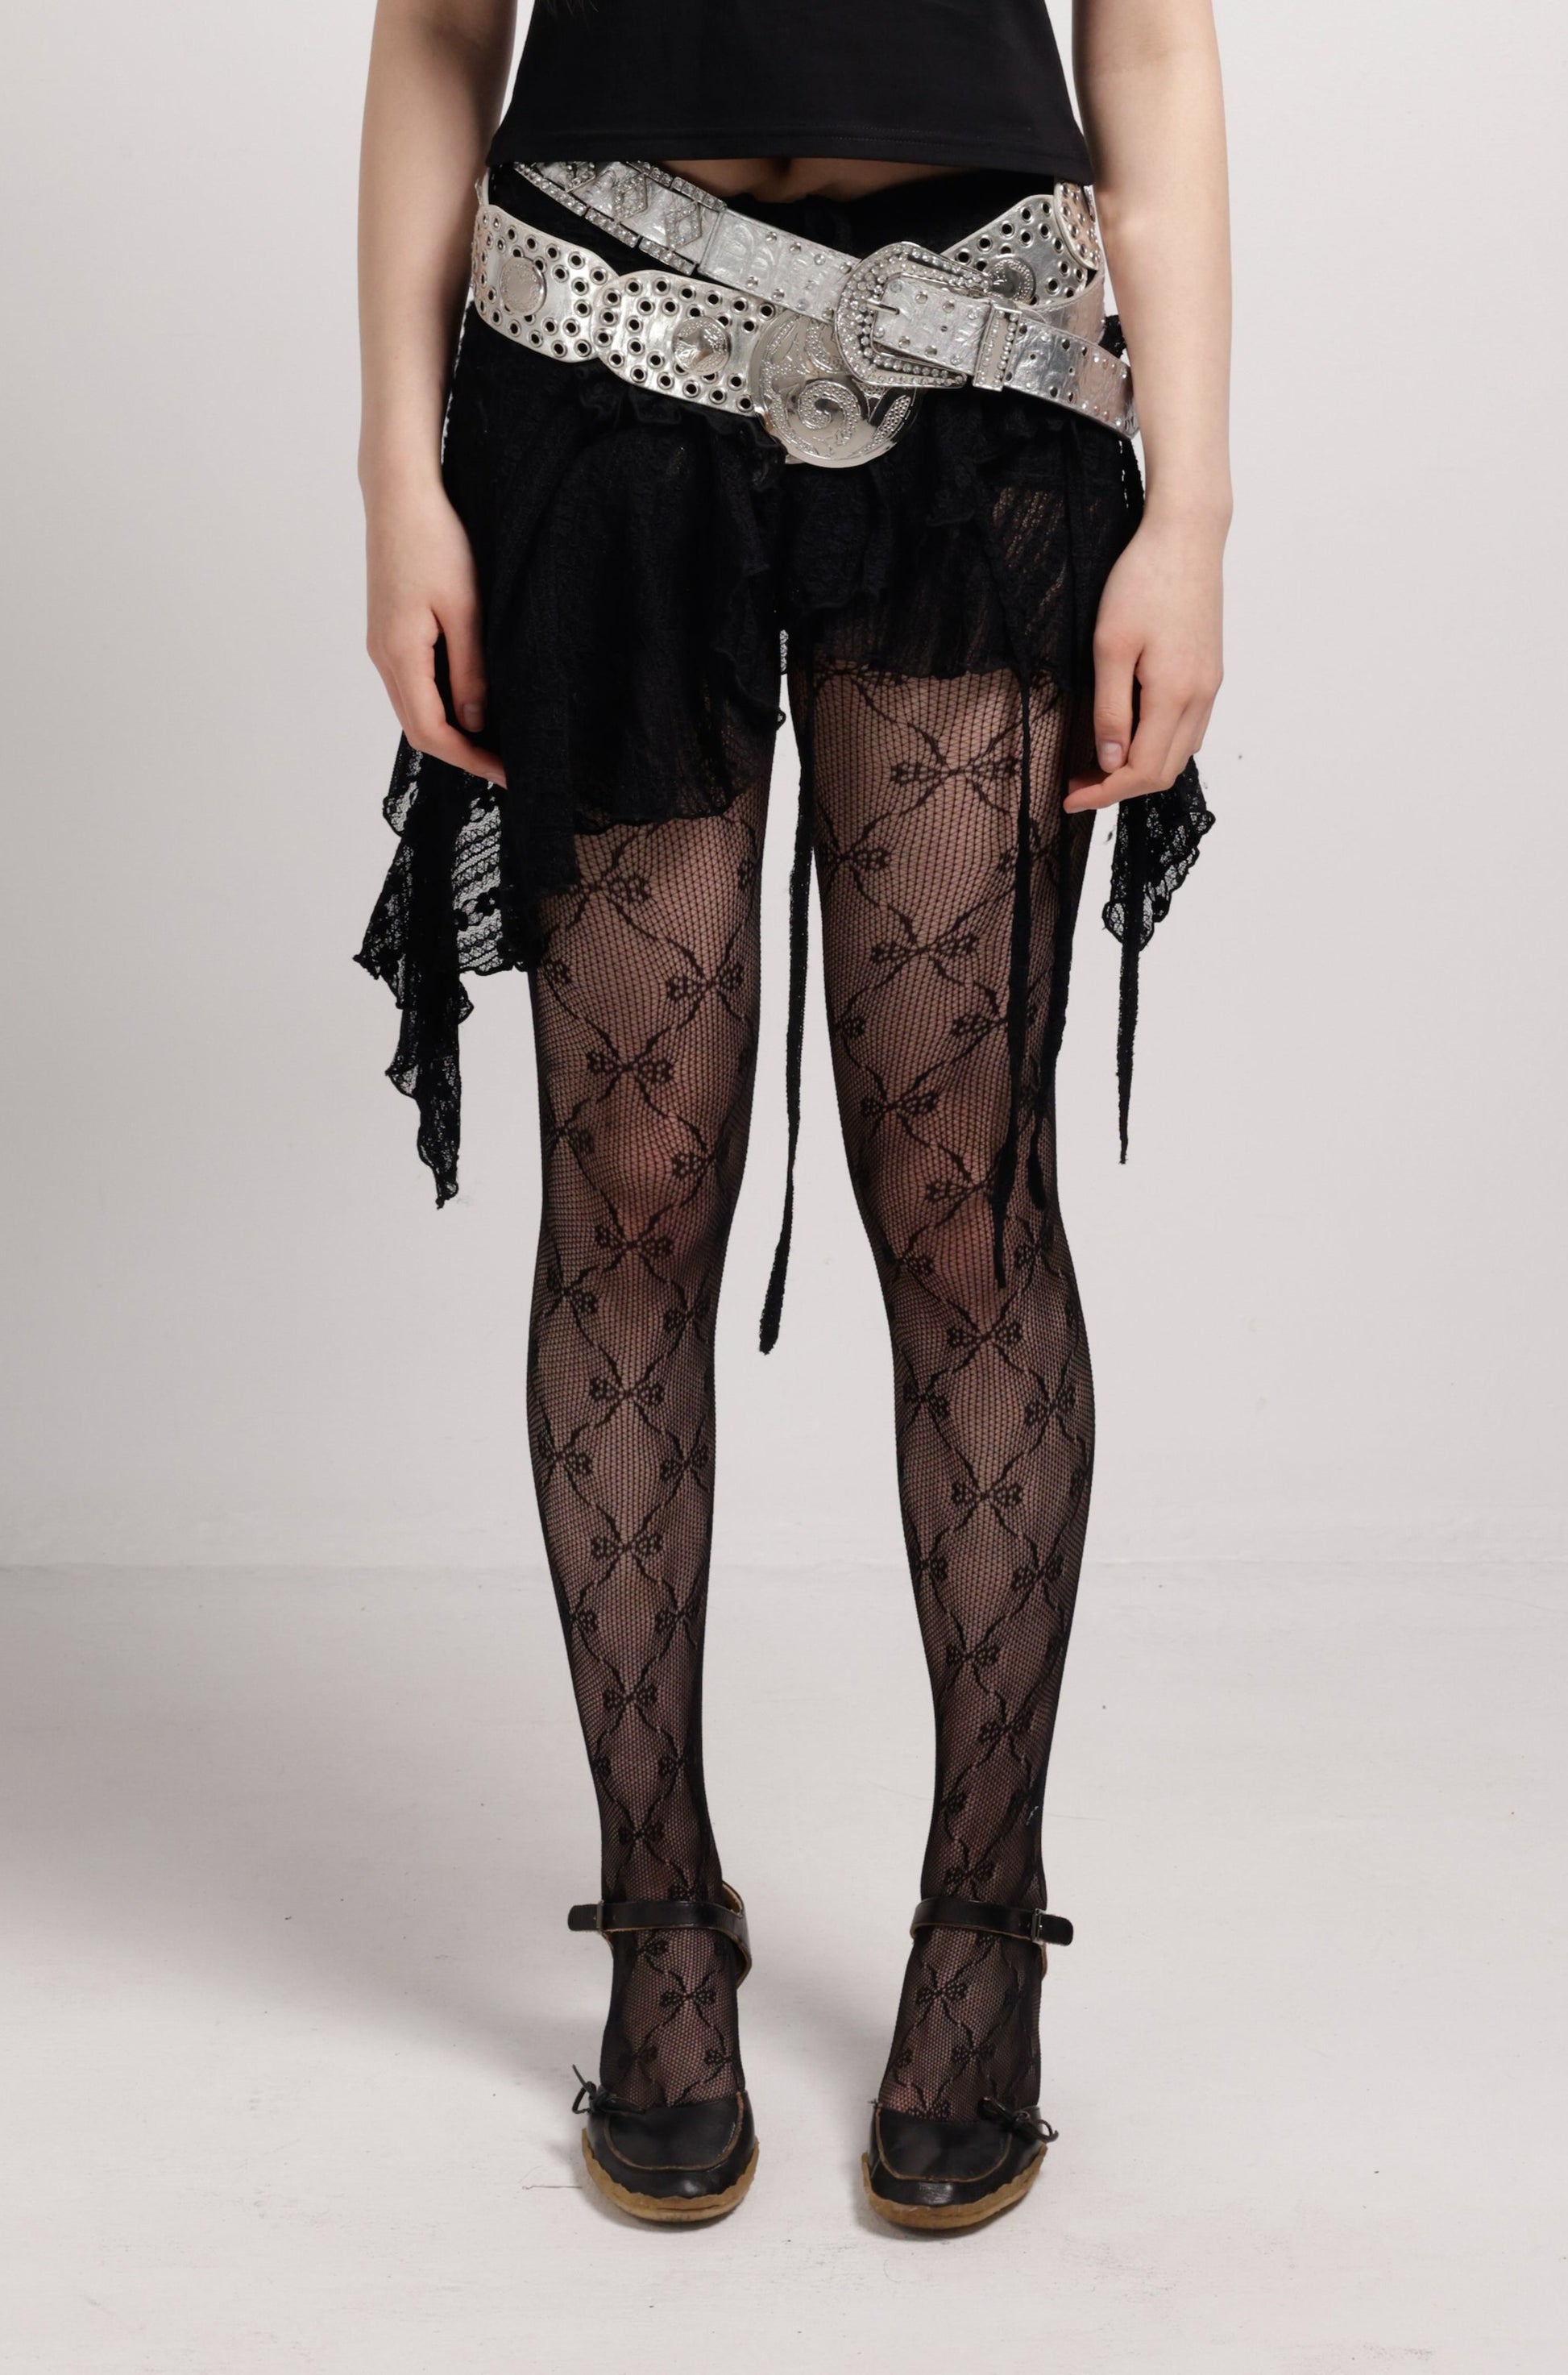 girl wearing black lace tights with black bows | Lace Me Up Tights in Black | Bow tights | Baobei Label